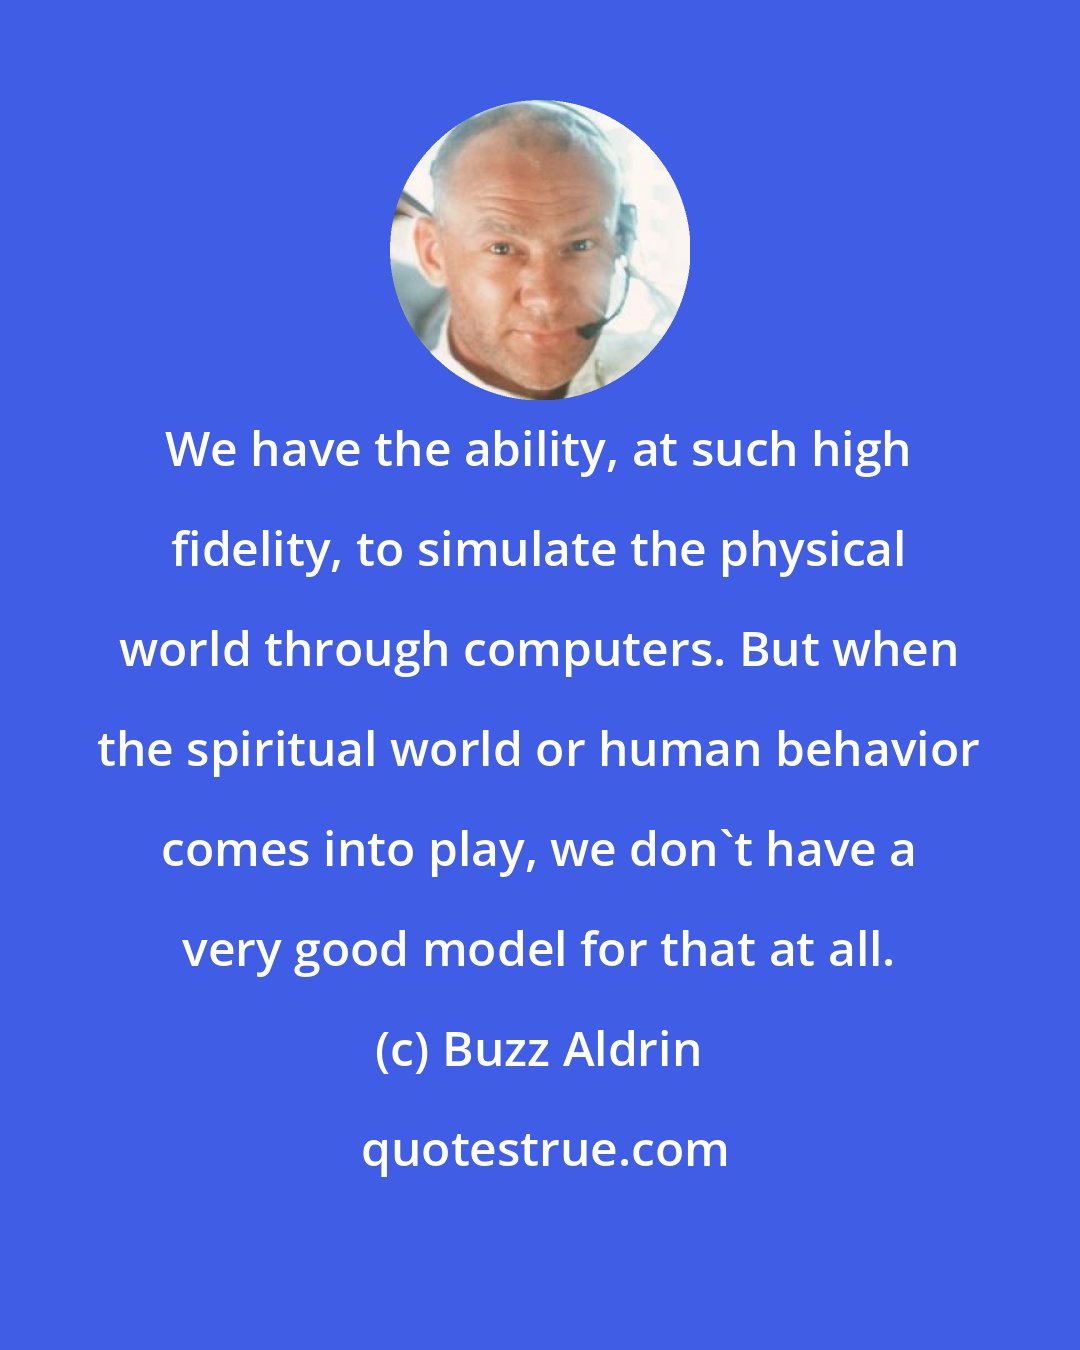 Buzz Aldrin: We have the ability, at such high fidelity, to simulate the physical world through computers. But when the spiritual world or human behavior comes into play, we don't have a very good model for that at all.